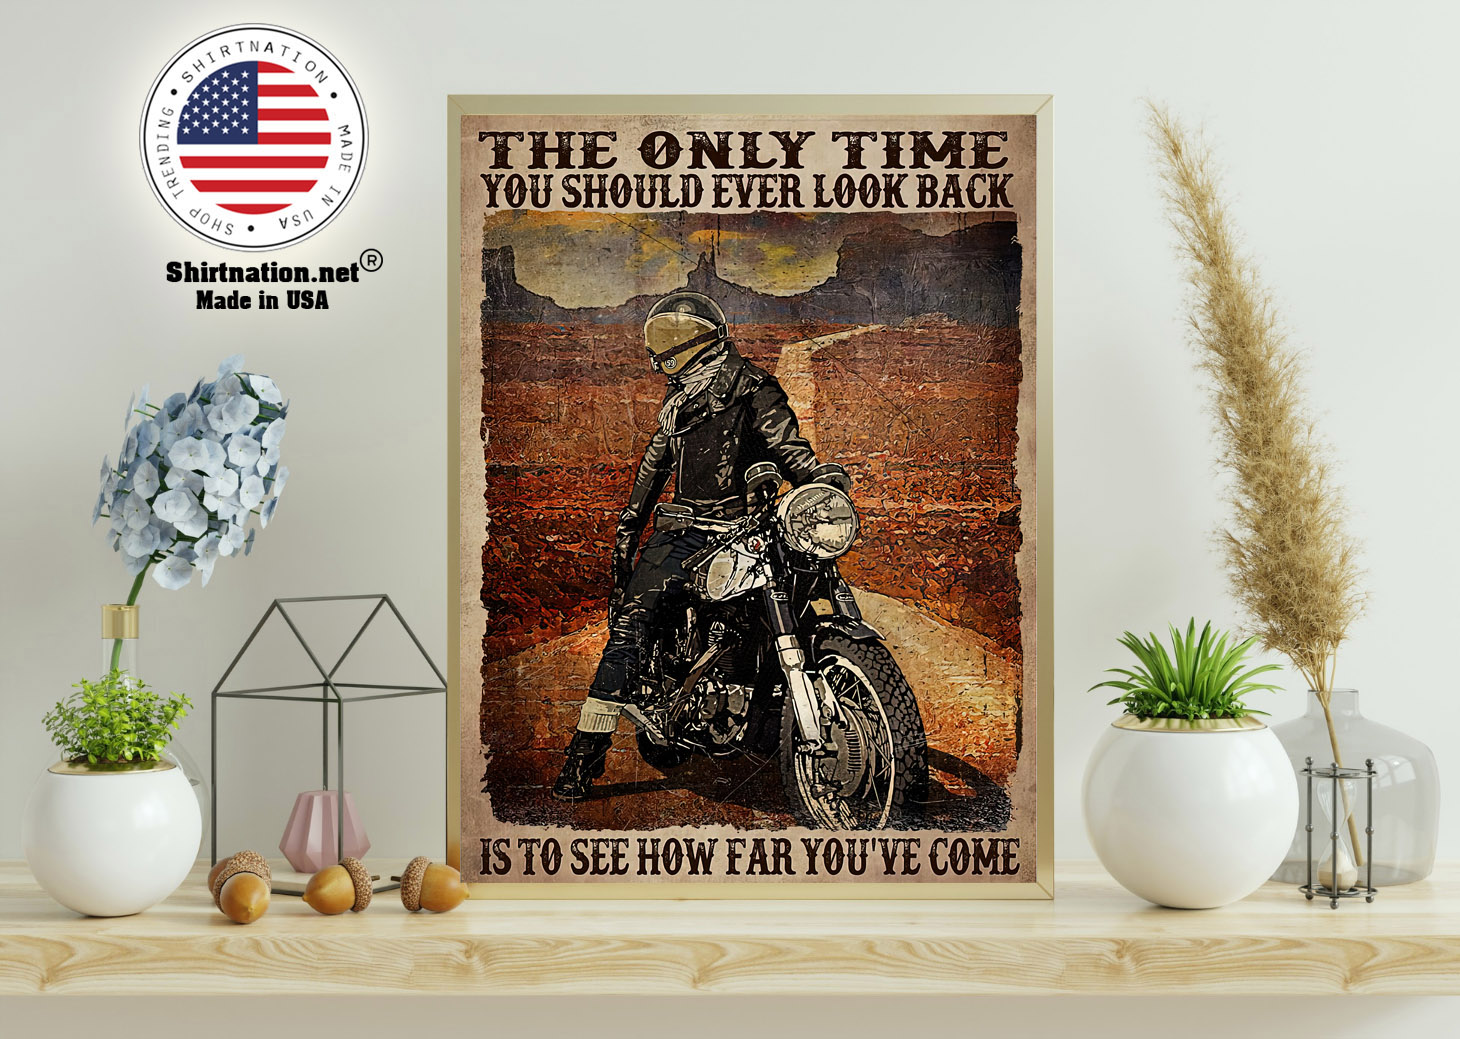 Motorcycle The only time you should ever look back is to see how far youve come poster 11